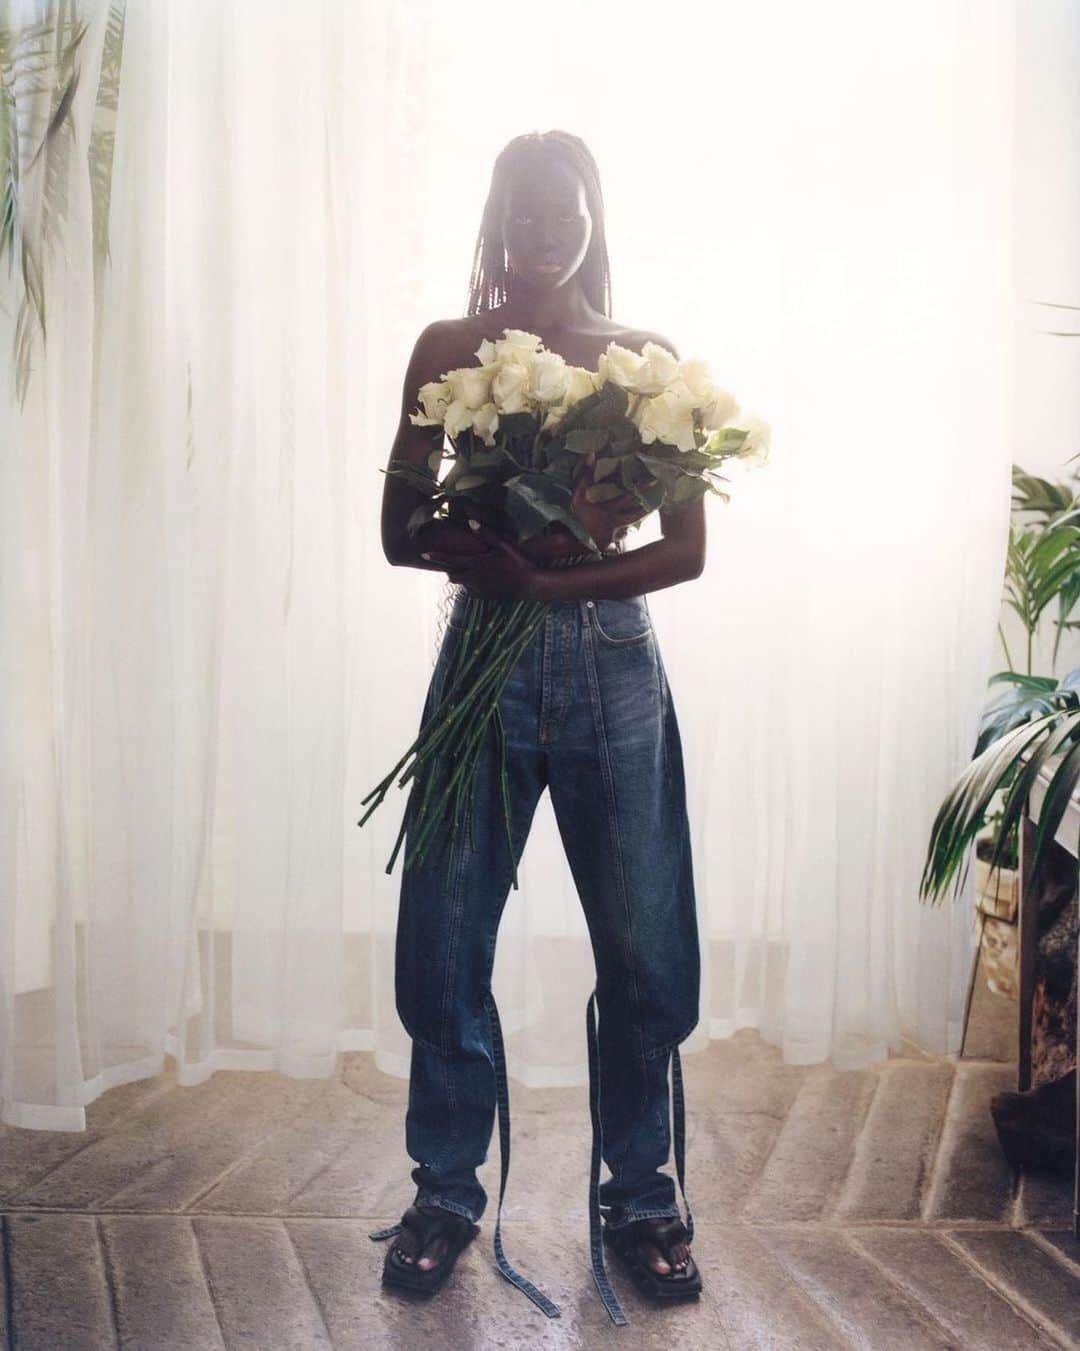 AnOther Magazineのインスタグラム：「#FridayFlowers – the beautiful @adutakech for the newly launched @dazed Spring/Summer 2021 🌹 ⁠⁠ ⁠⁠ Marking the end of an era at Dazed, the last issue under @isabellaburley, @reidjamie, @emmawyman, and @clairemahealy looks to the future of where this year will take us. Discover the new issue at the link in our bio 📲⁠⁠⁠ ⁠⁠ Photography @senta.simond⁠⁠⁠ Styling @agata_belcen ⁠⁠⁠ Hair @soichiinagaki⁠⁠⁠ Make-up @siddharthasimone⁠⁠⁠ Casting @noah__shelley⁠⁠ Set design @suzannebeirne⁠⁠ Nails @saffrongoddard⁠⁠ ⁠⁠ Taken from the spring 2021 #2021toInfinity issue of #Dazed⁠⁠」